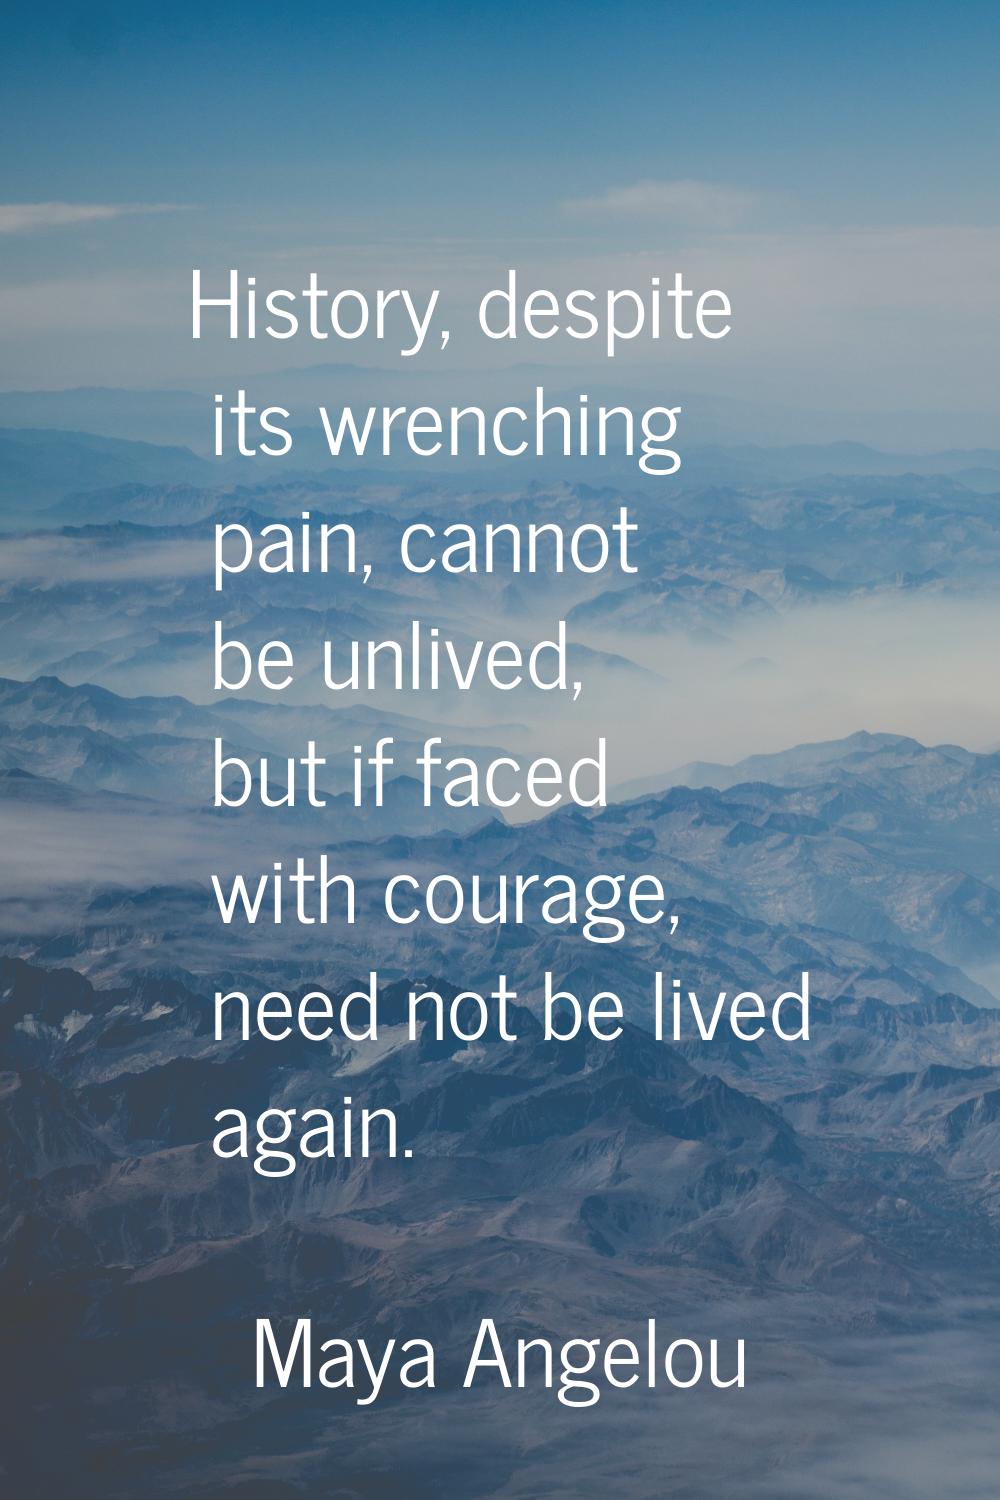 History, despite its wrenching pain, cannot be unlived, but if faced with courage, need not be live